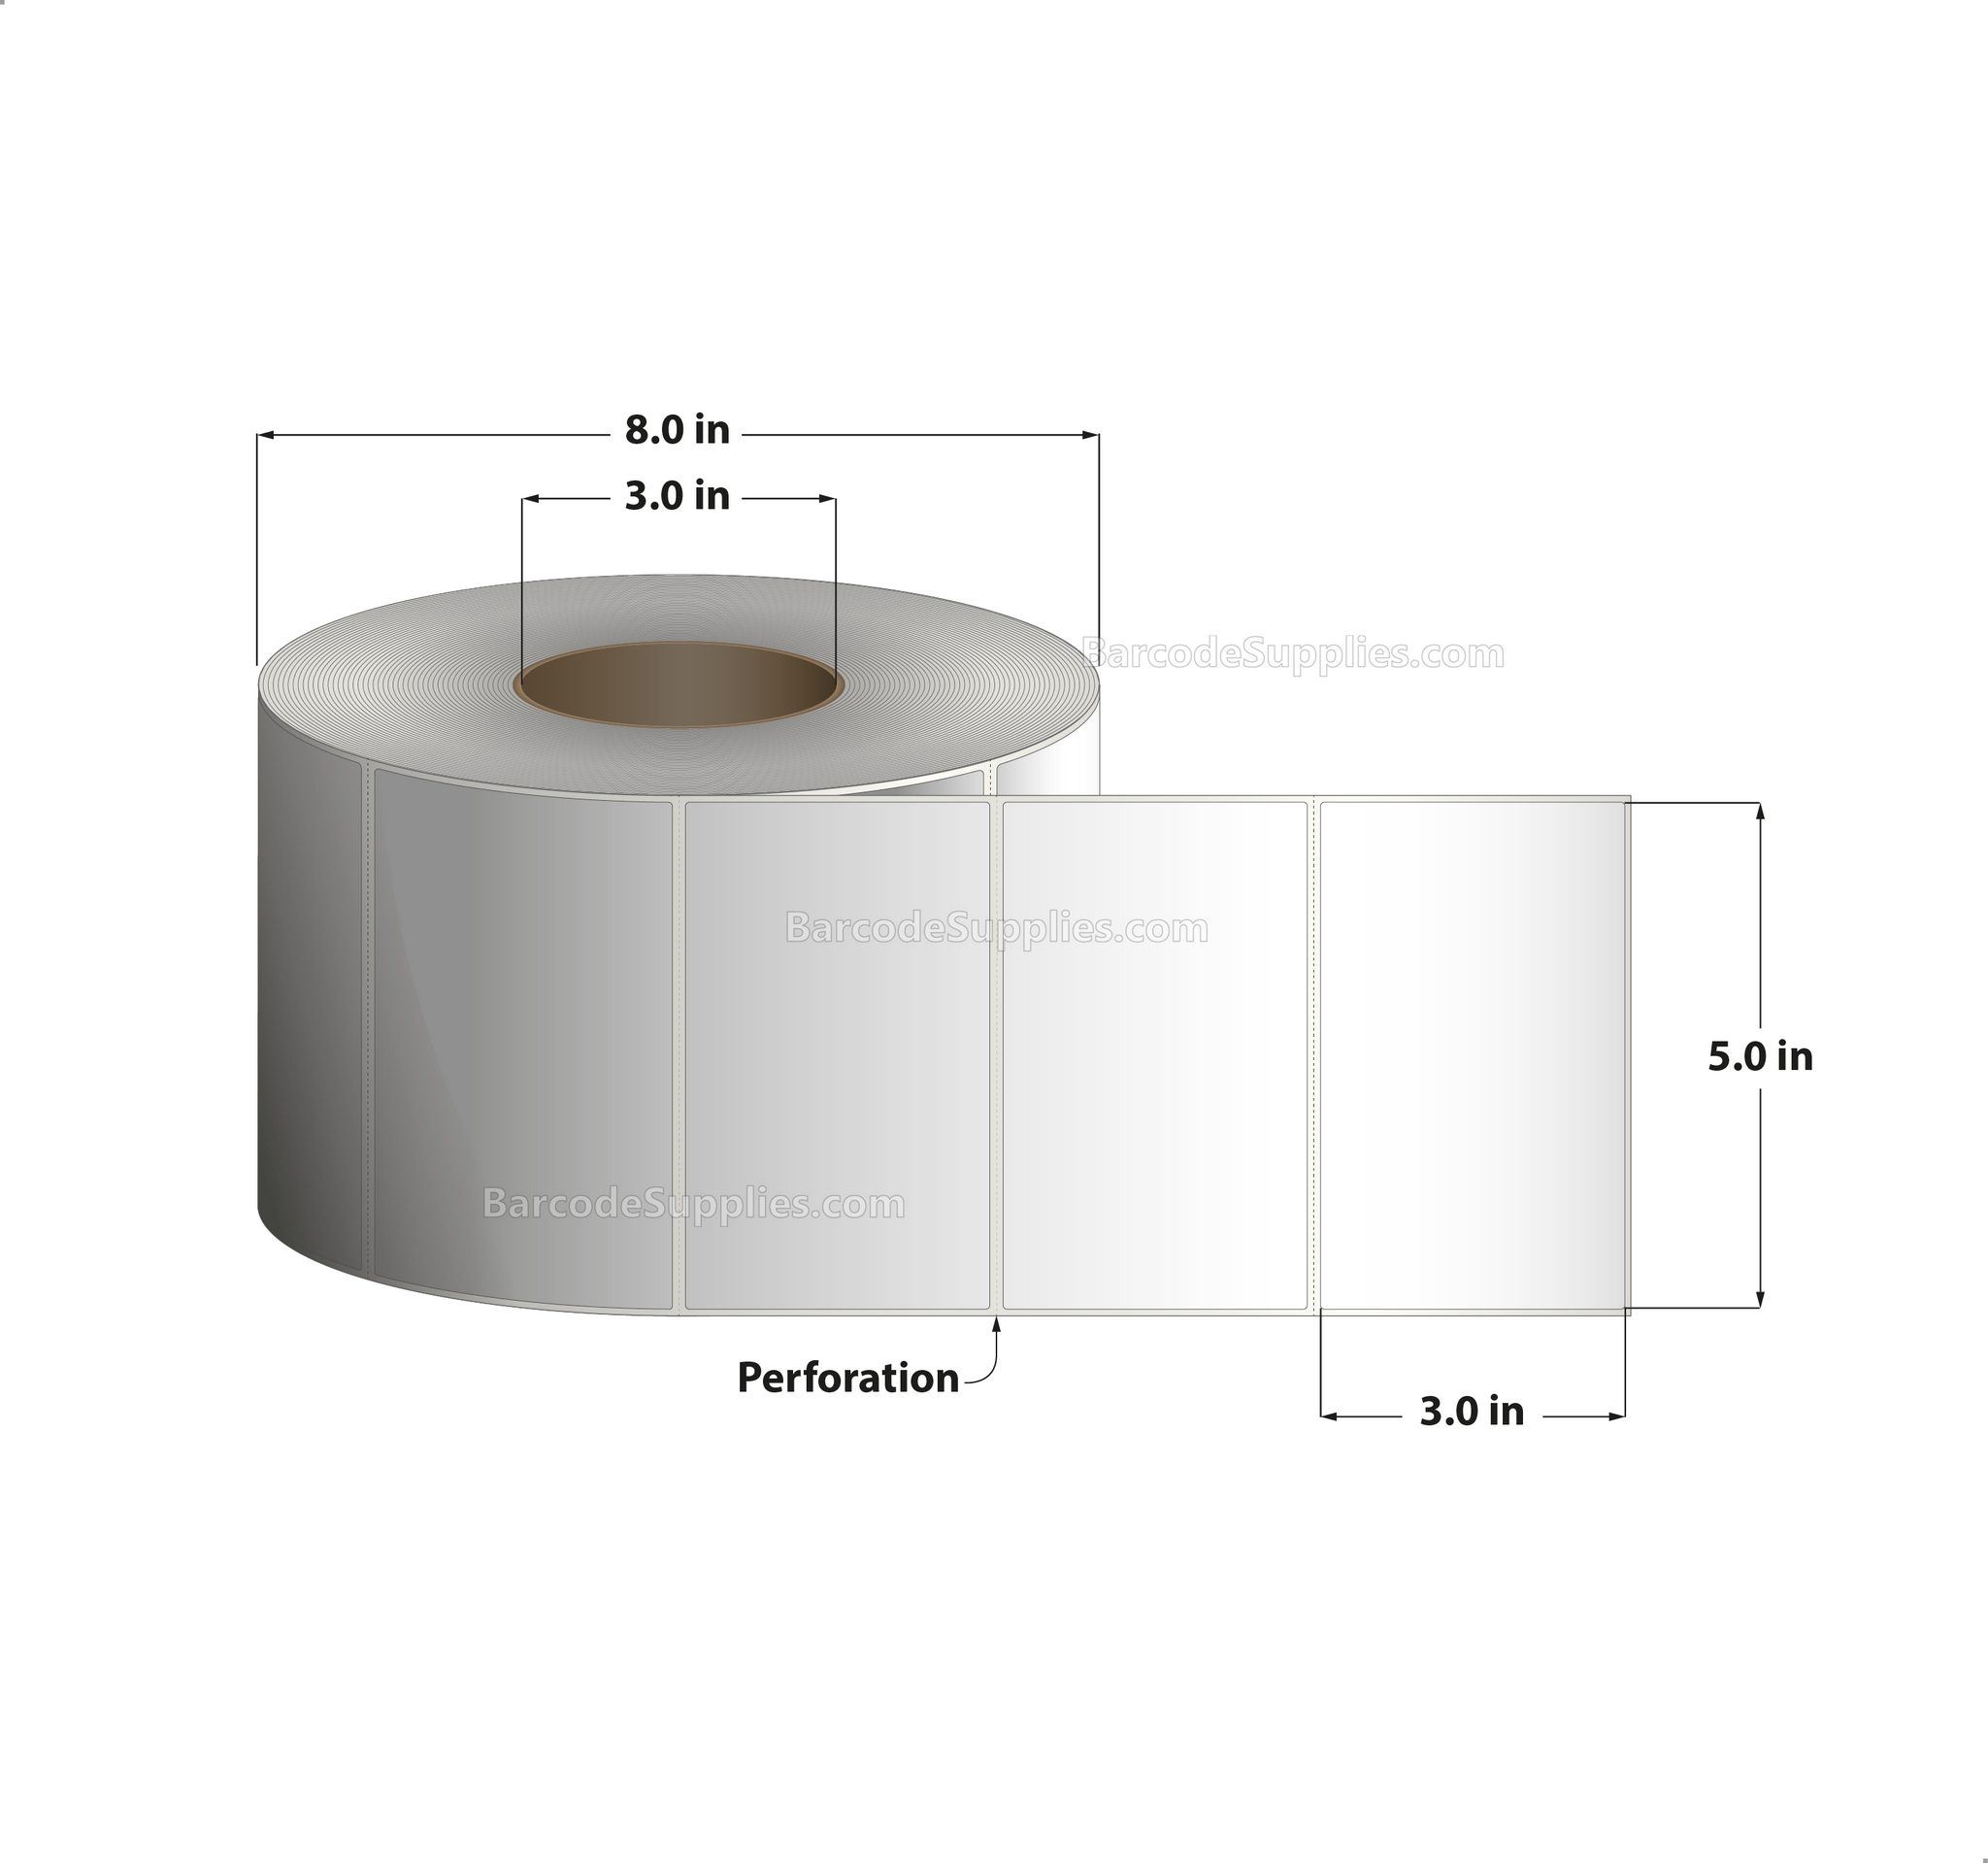 5 x 3 Thermal Transfer White Labels With Permanent Acrylic Adhesive - Perforated - 1900 Labels Per Roll - Carton Of 4 Rolls - 7600 Labels Total - MPN: TH53-1P